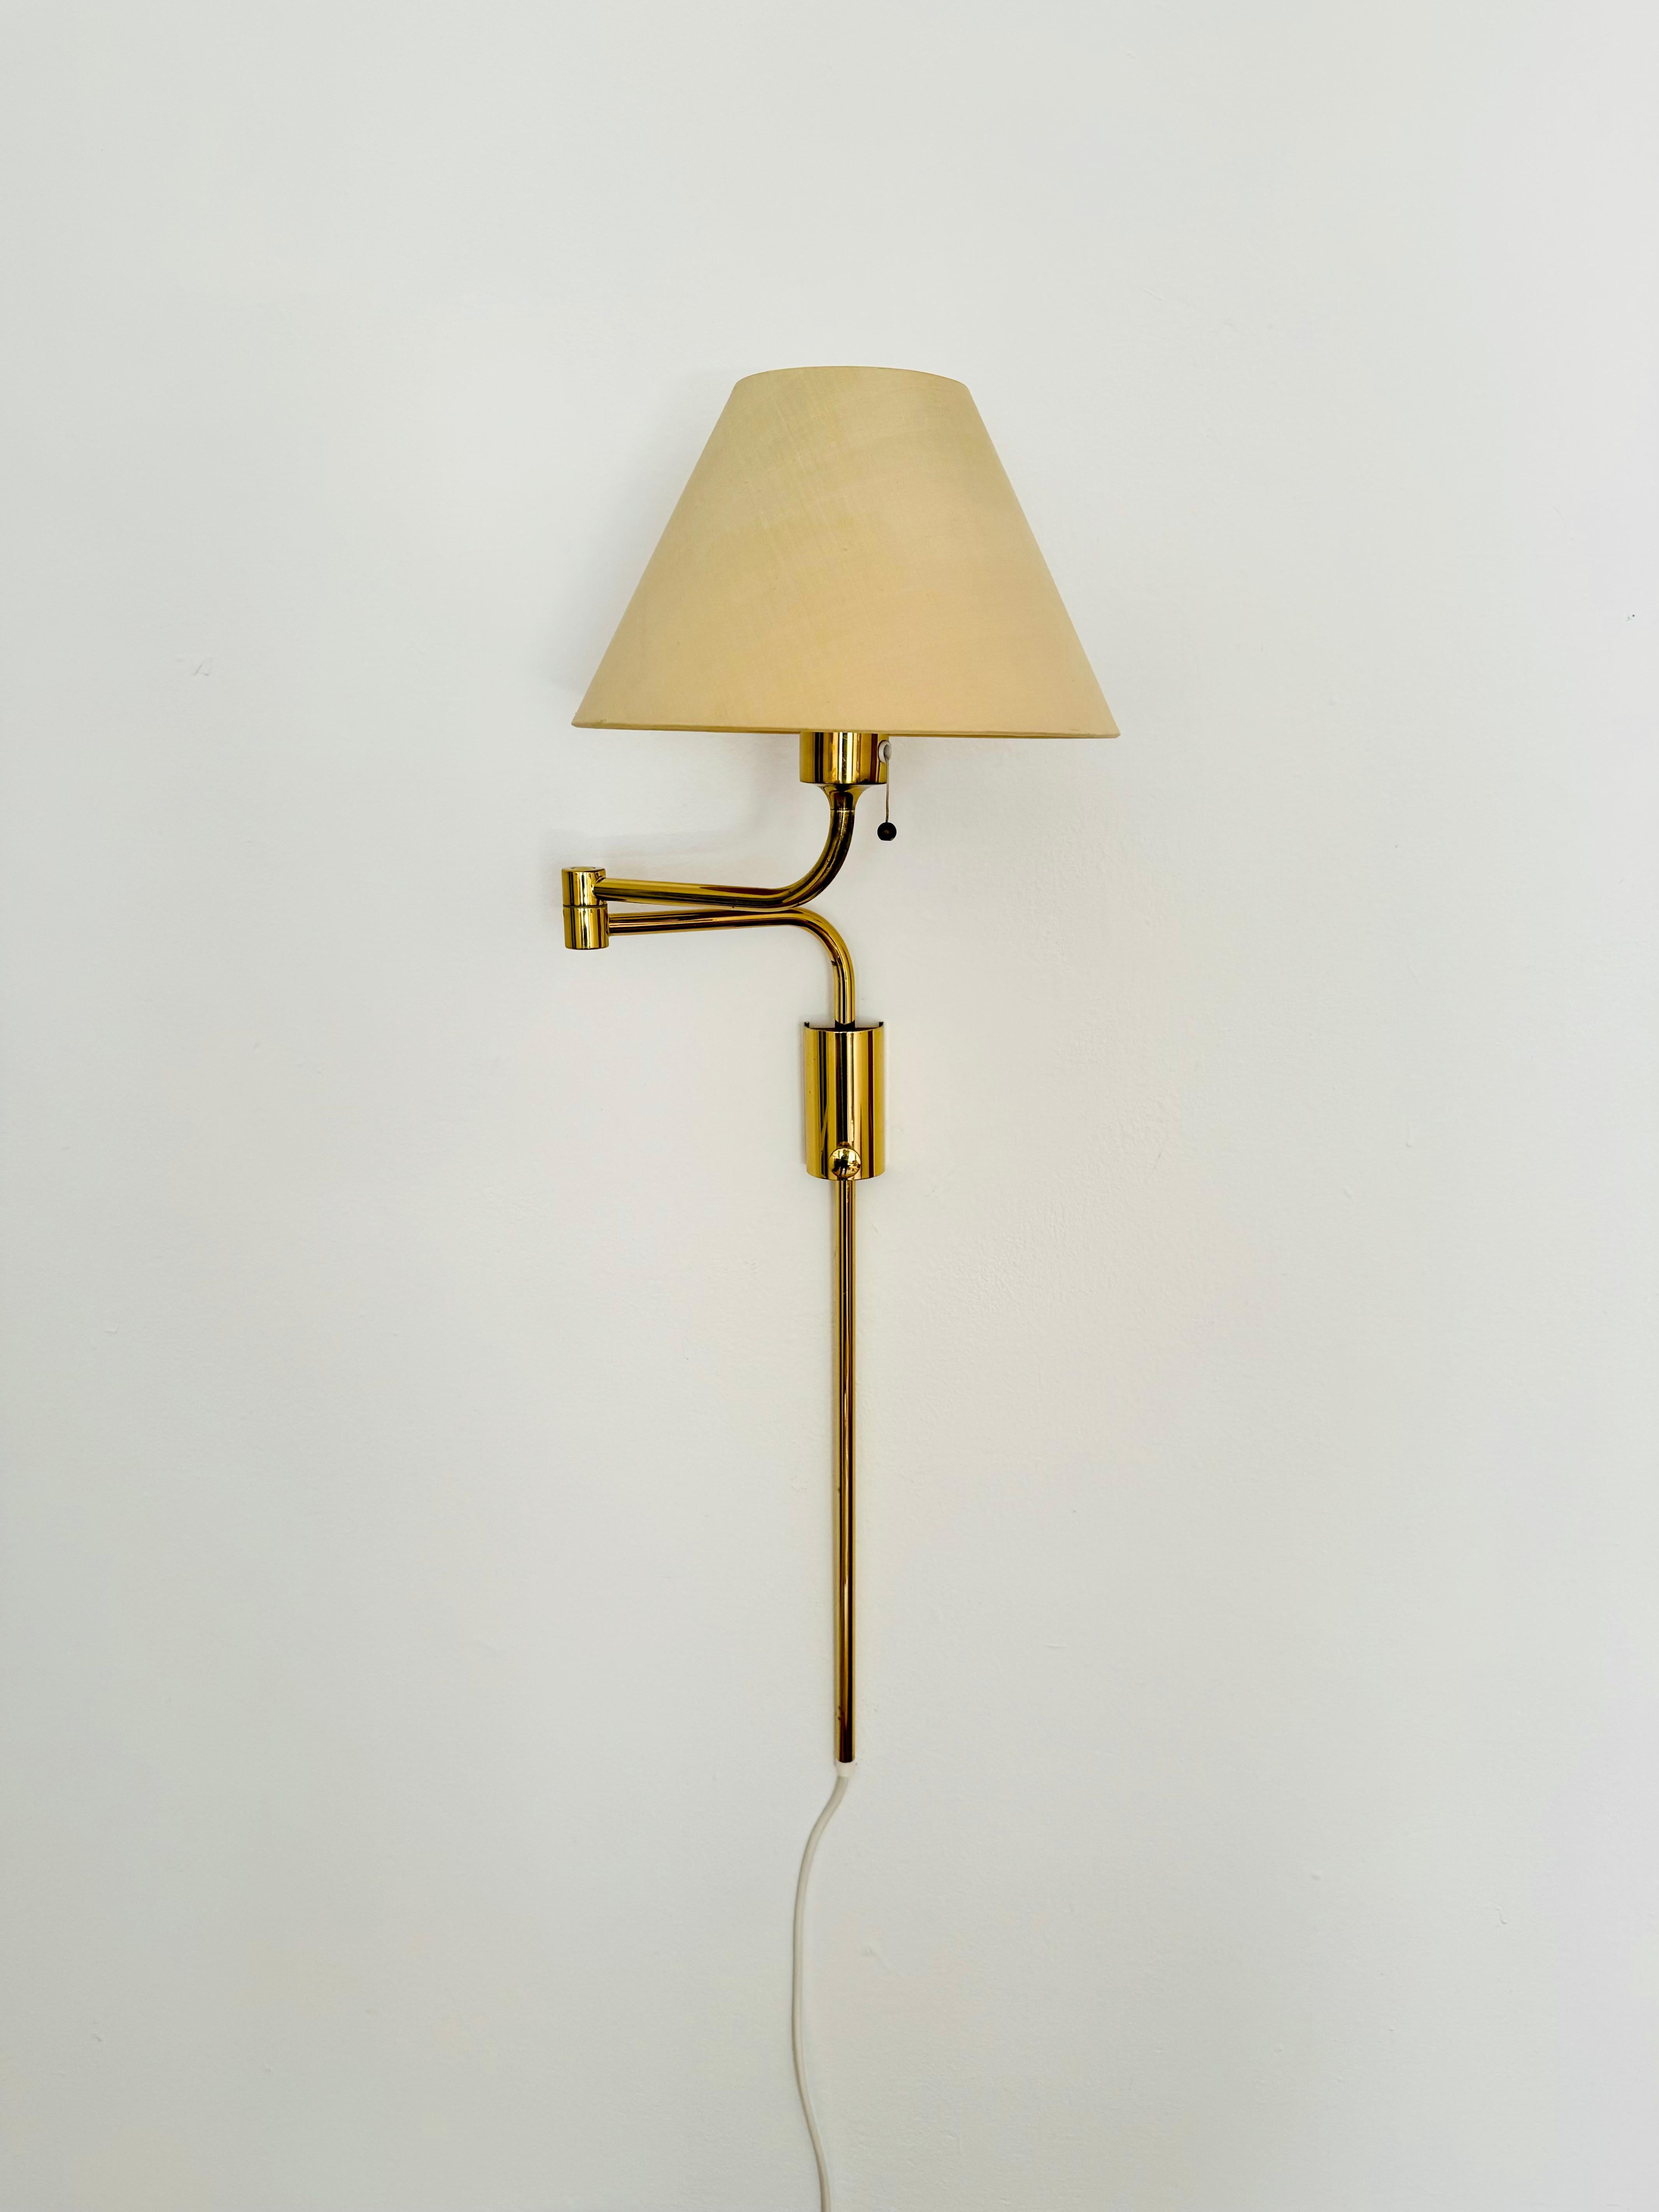 Very nice height-adjustable brass wall lamp from the 1970s.
The design and the very beautiful details create a very elegant and pleasant light.
The lamp creates a very cozy atmosphere and is very high quality.
Infinitely adjustable.
The lamp can be